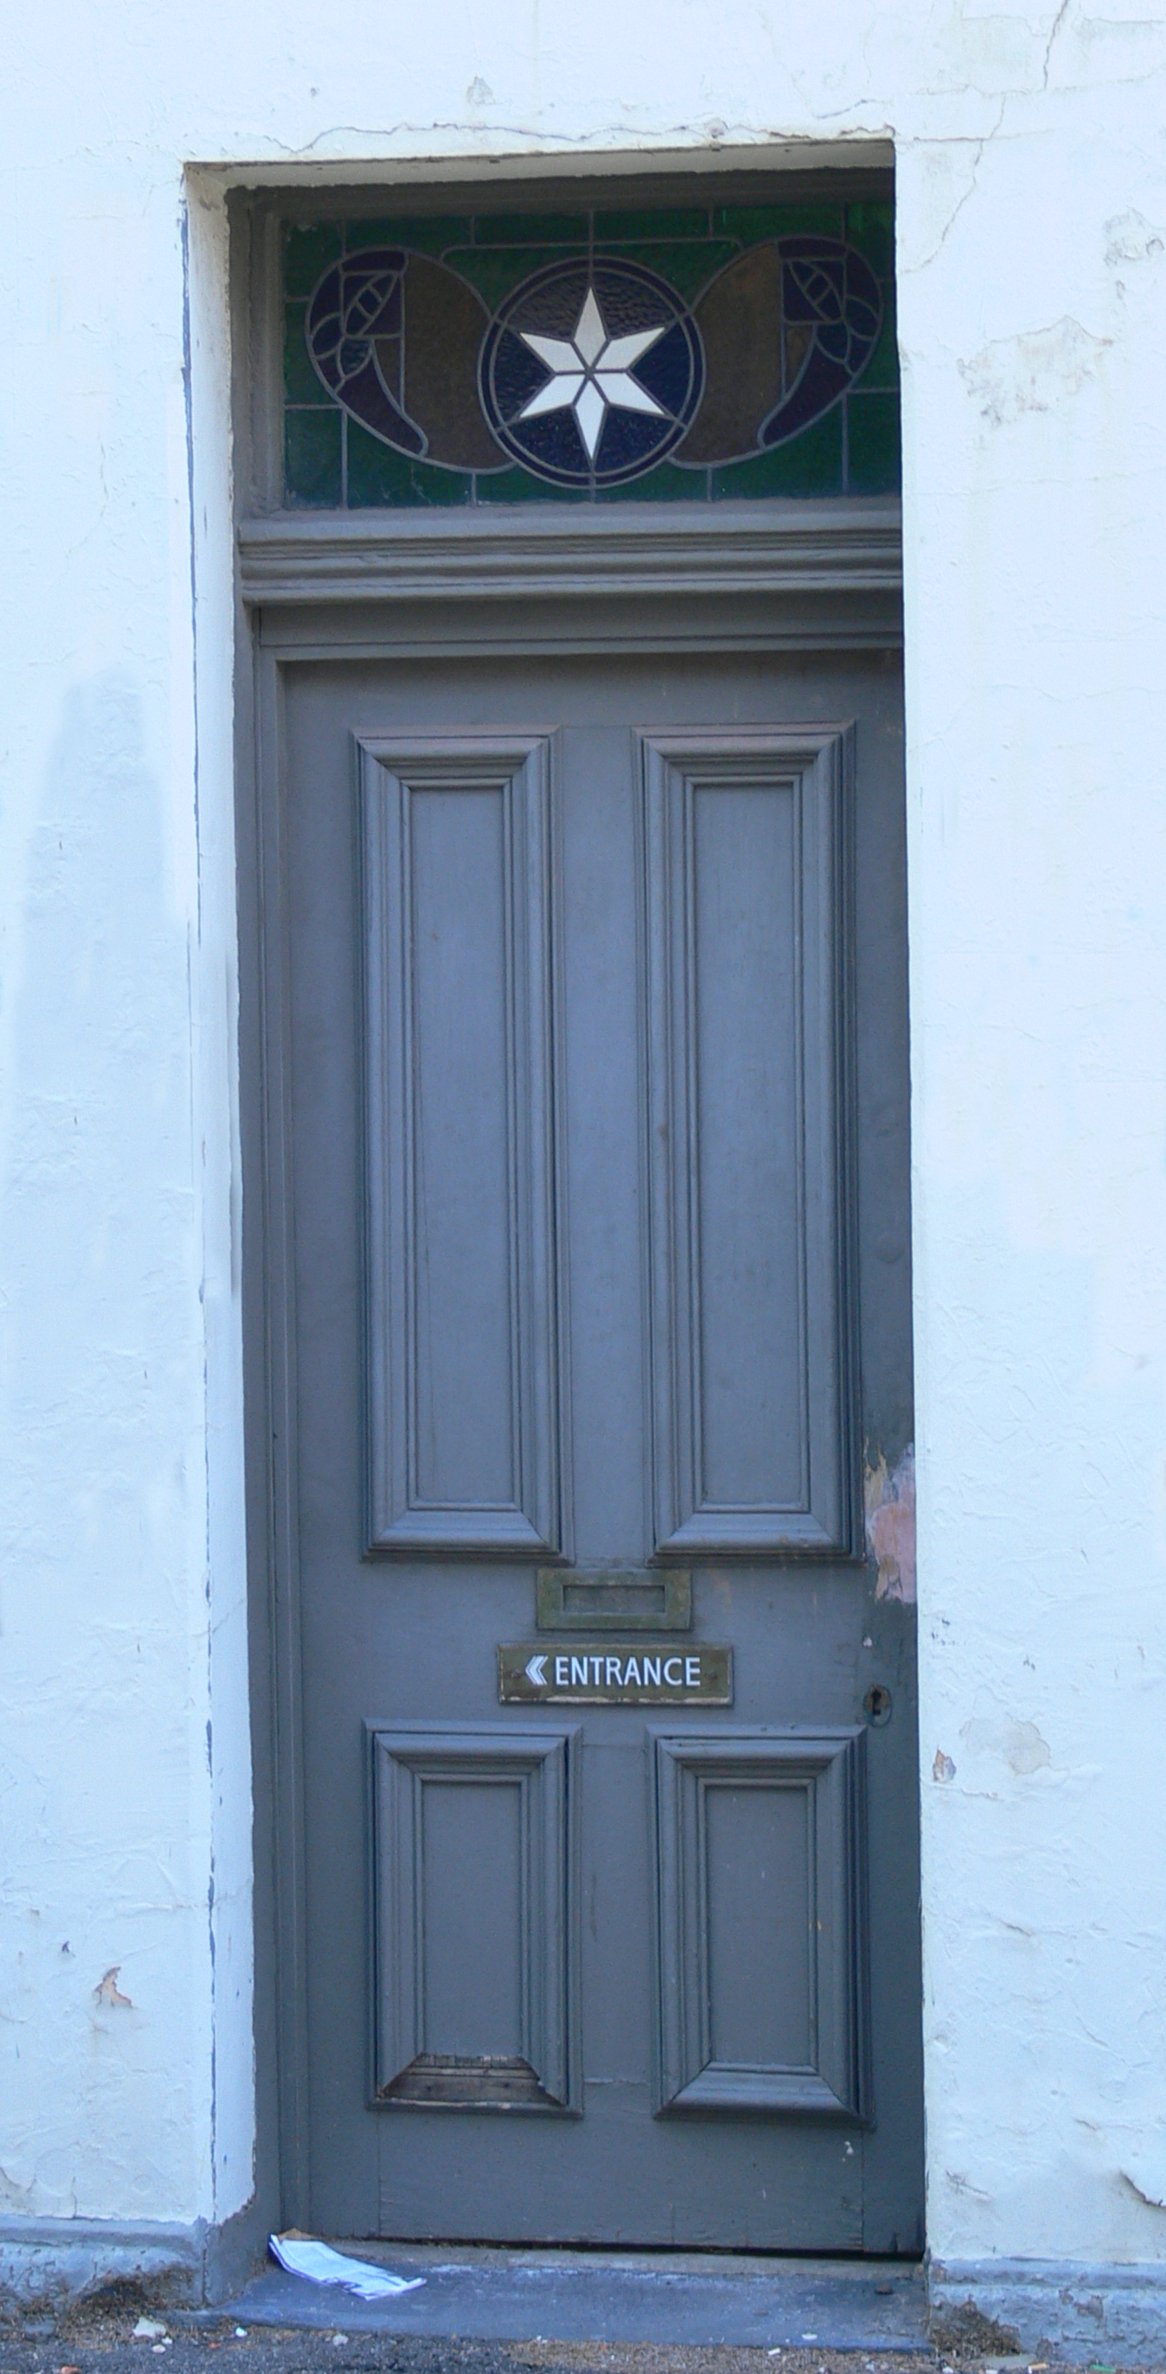 The Star - entrance door with star decoration